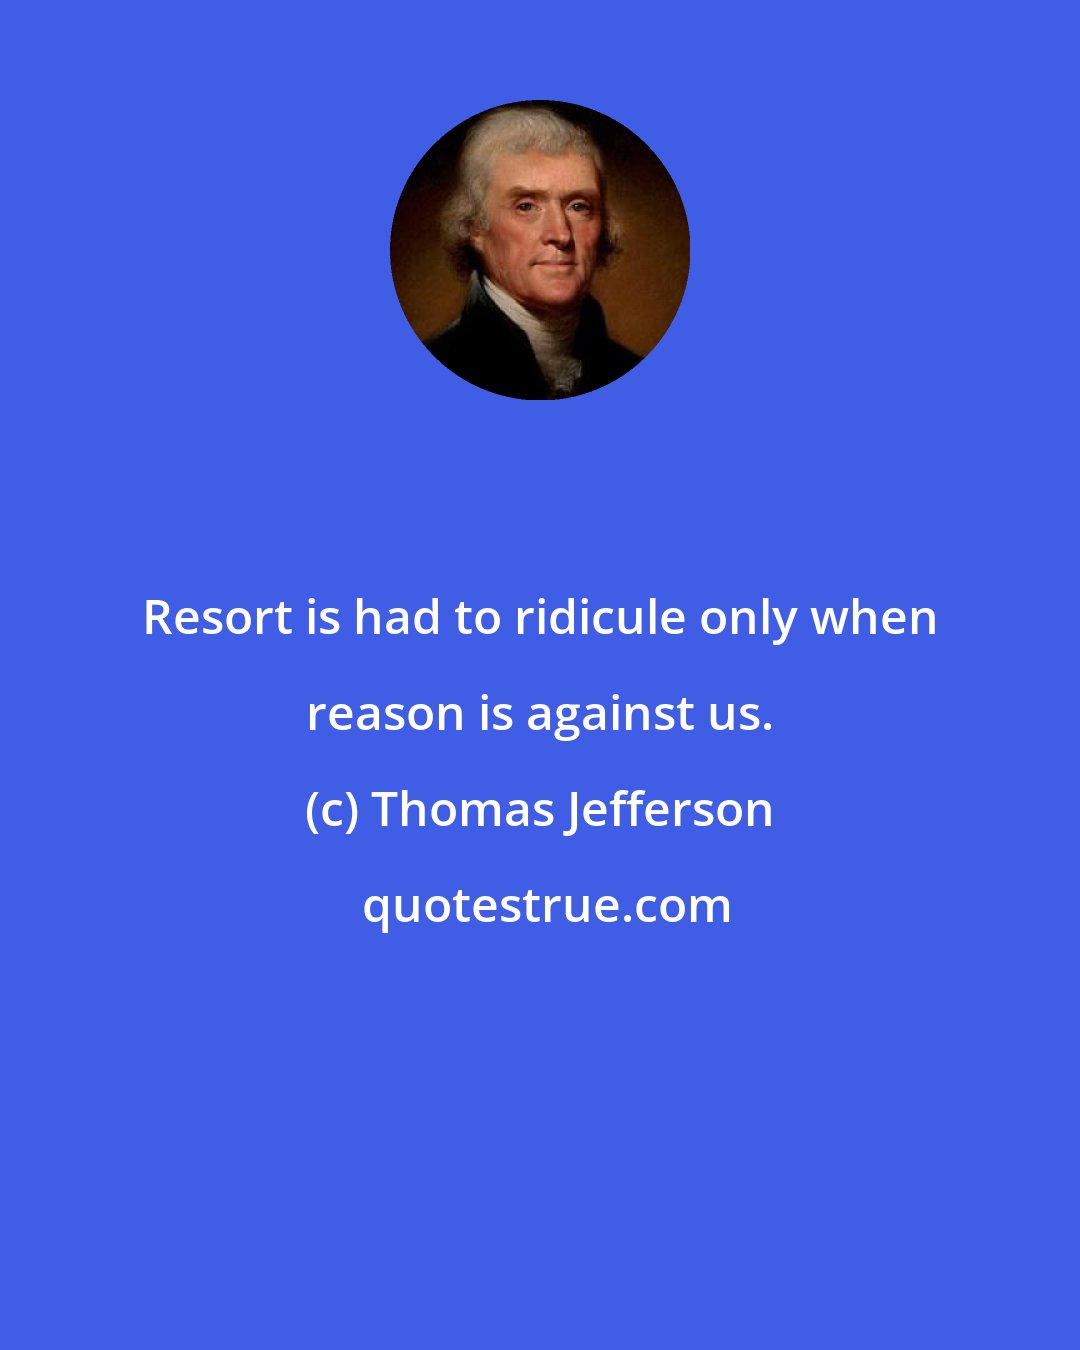 Thomas Jefferson: Resort is had to ridicule only when reason is against us.